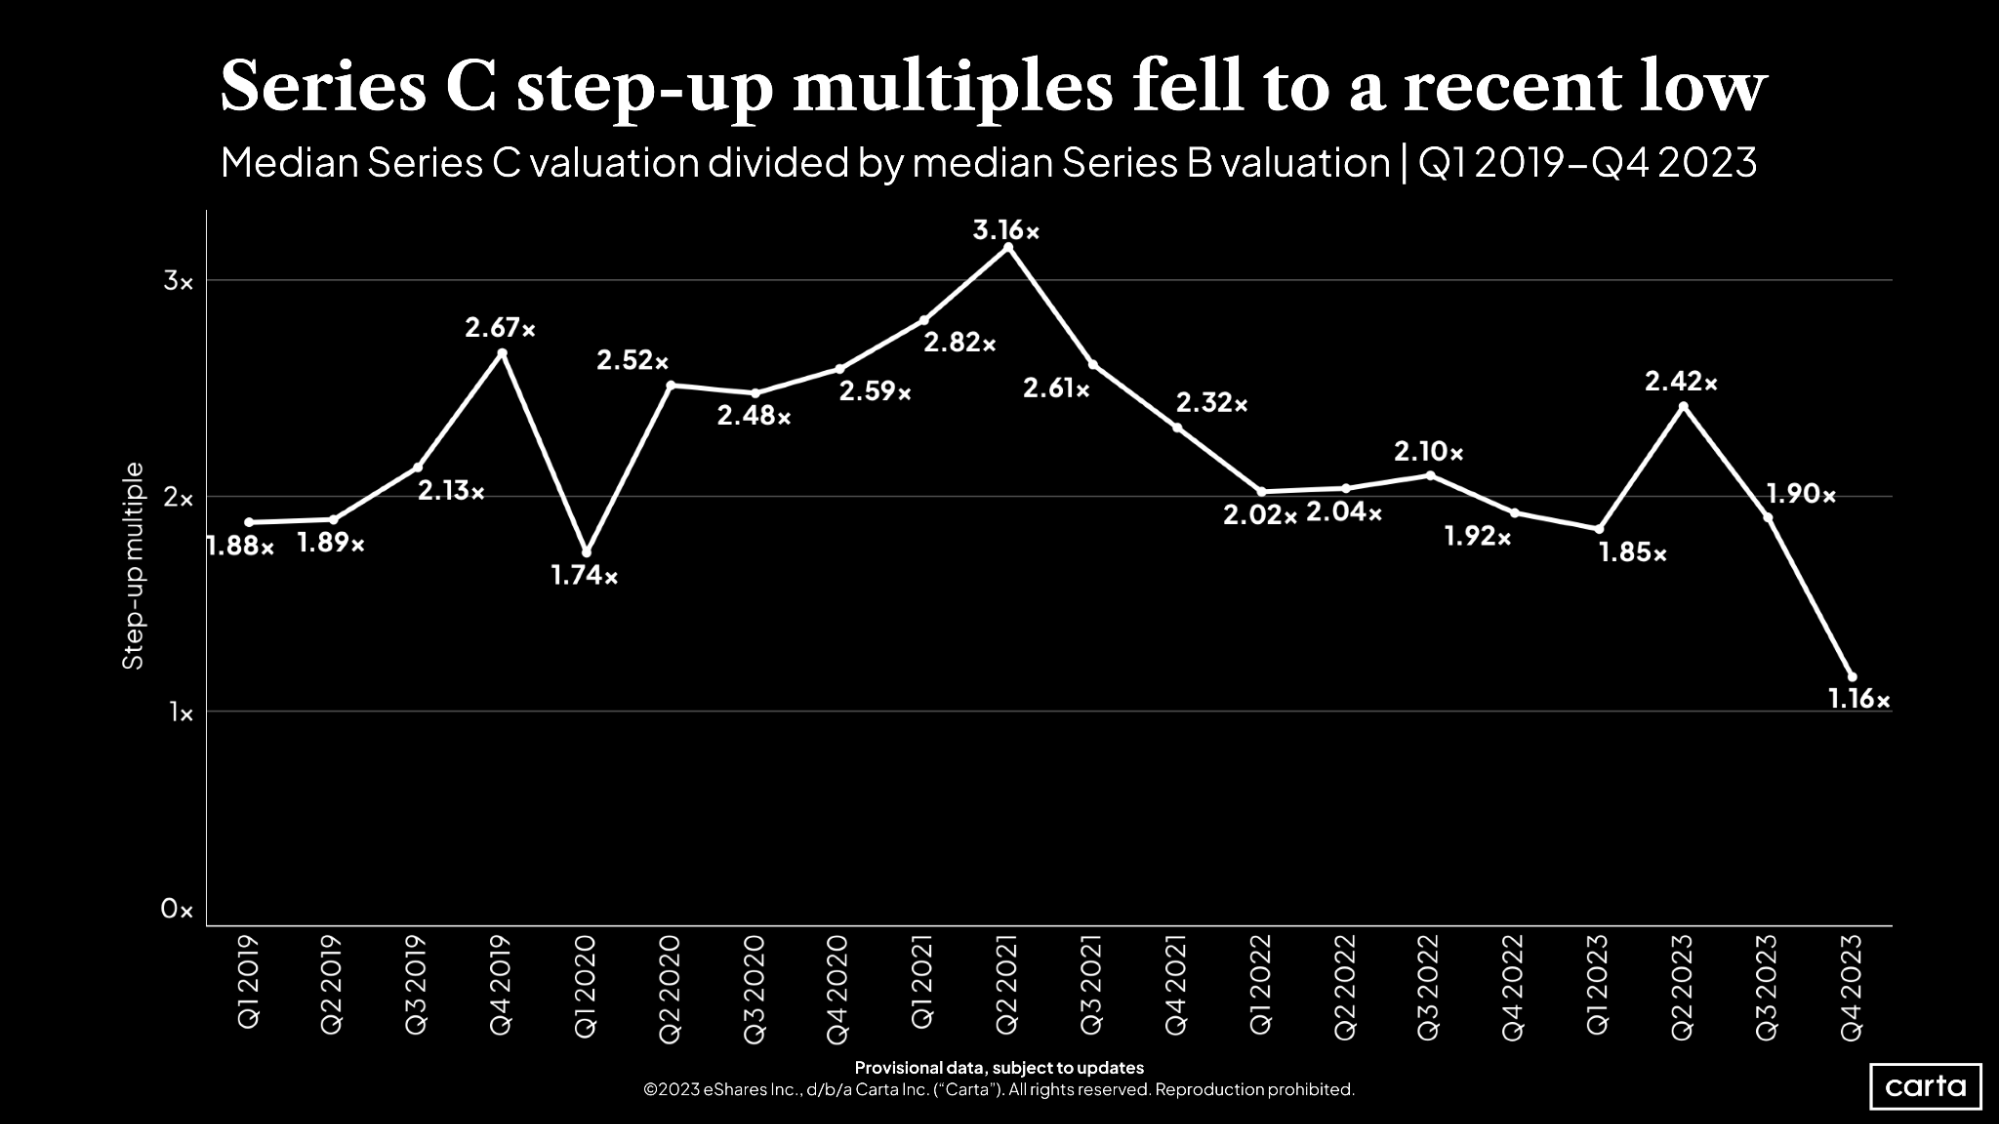 Series C step-up multiples fell to a recent low